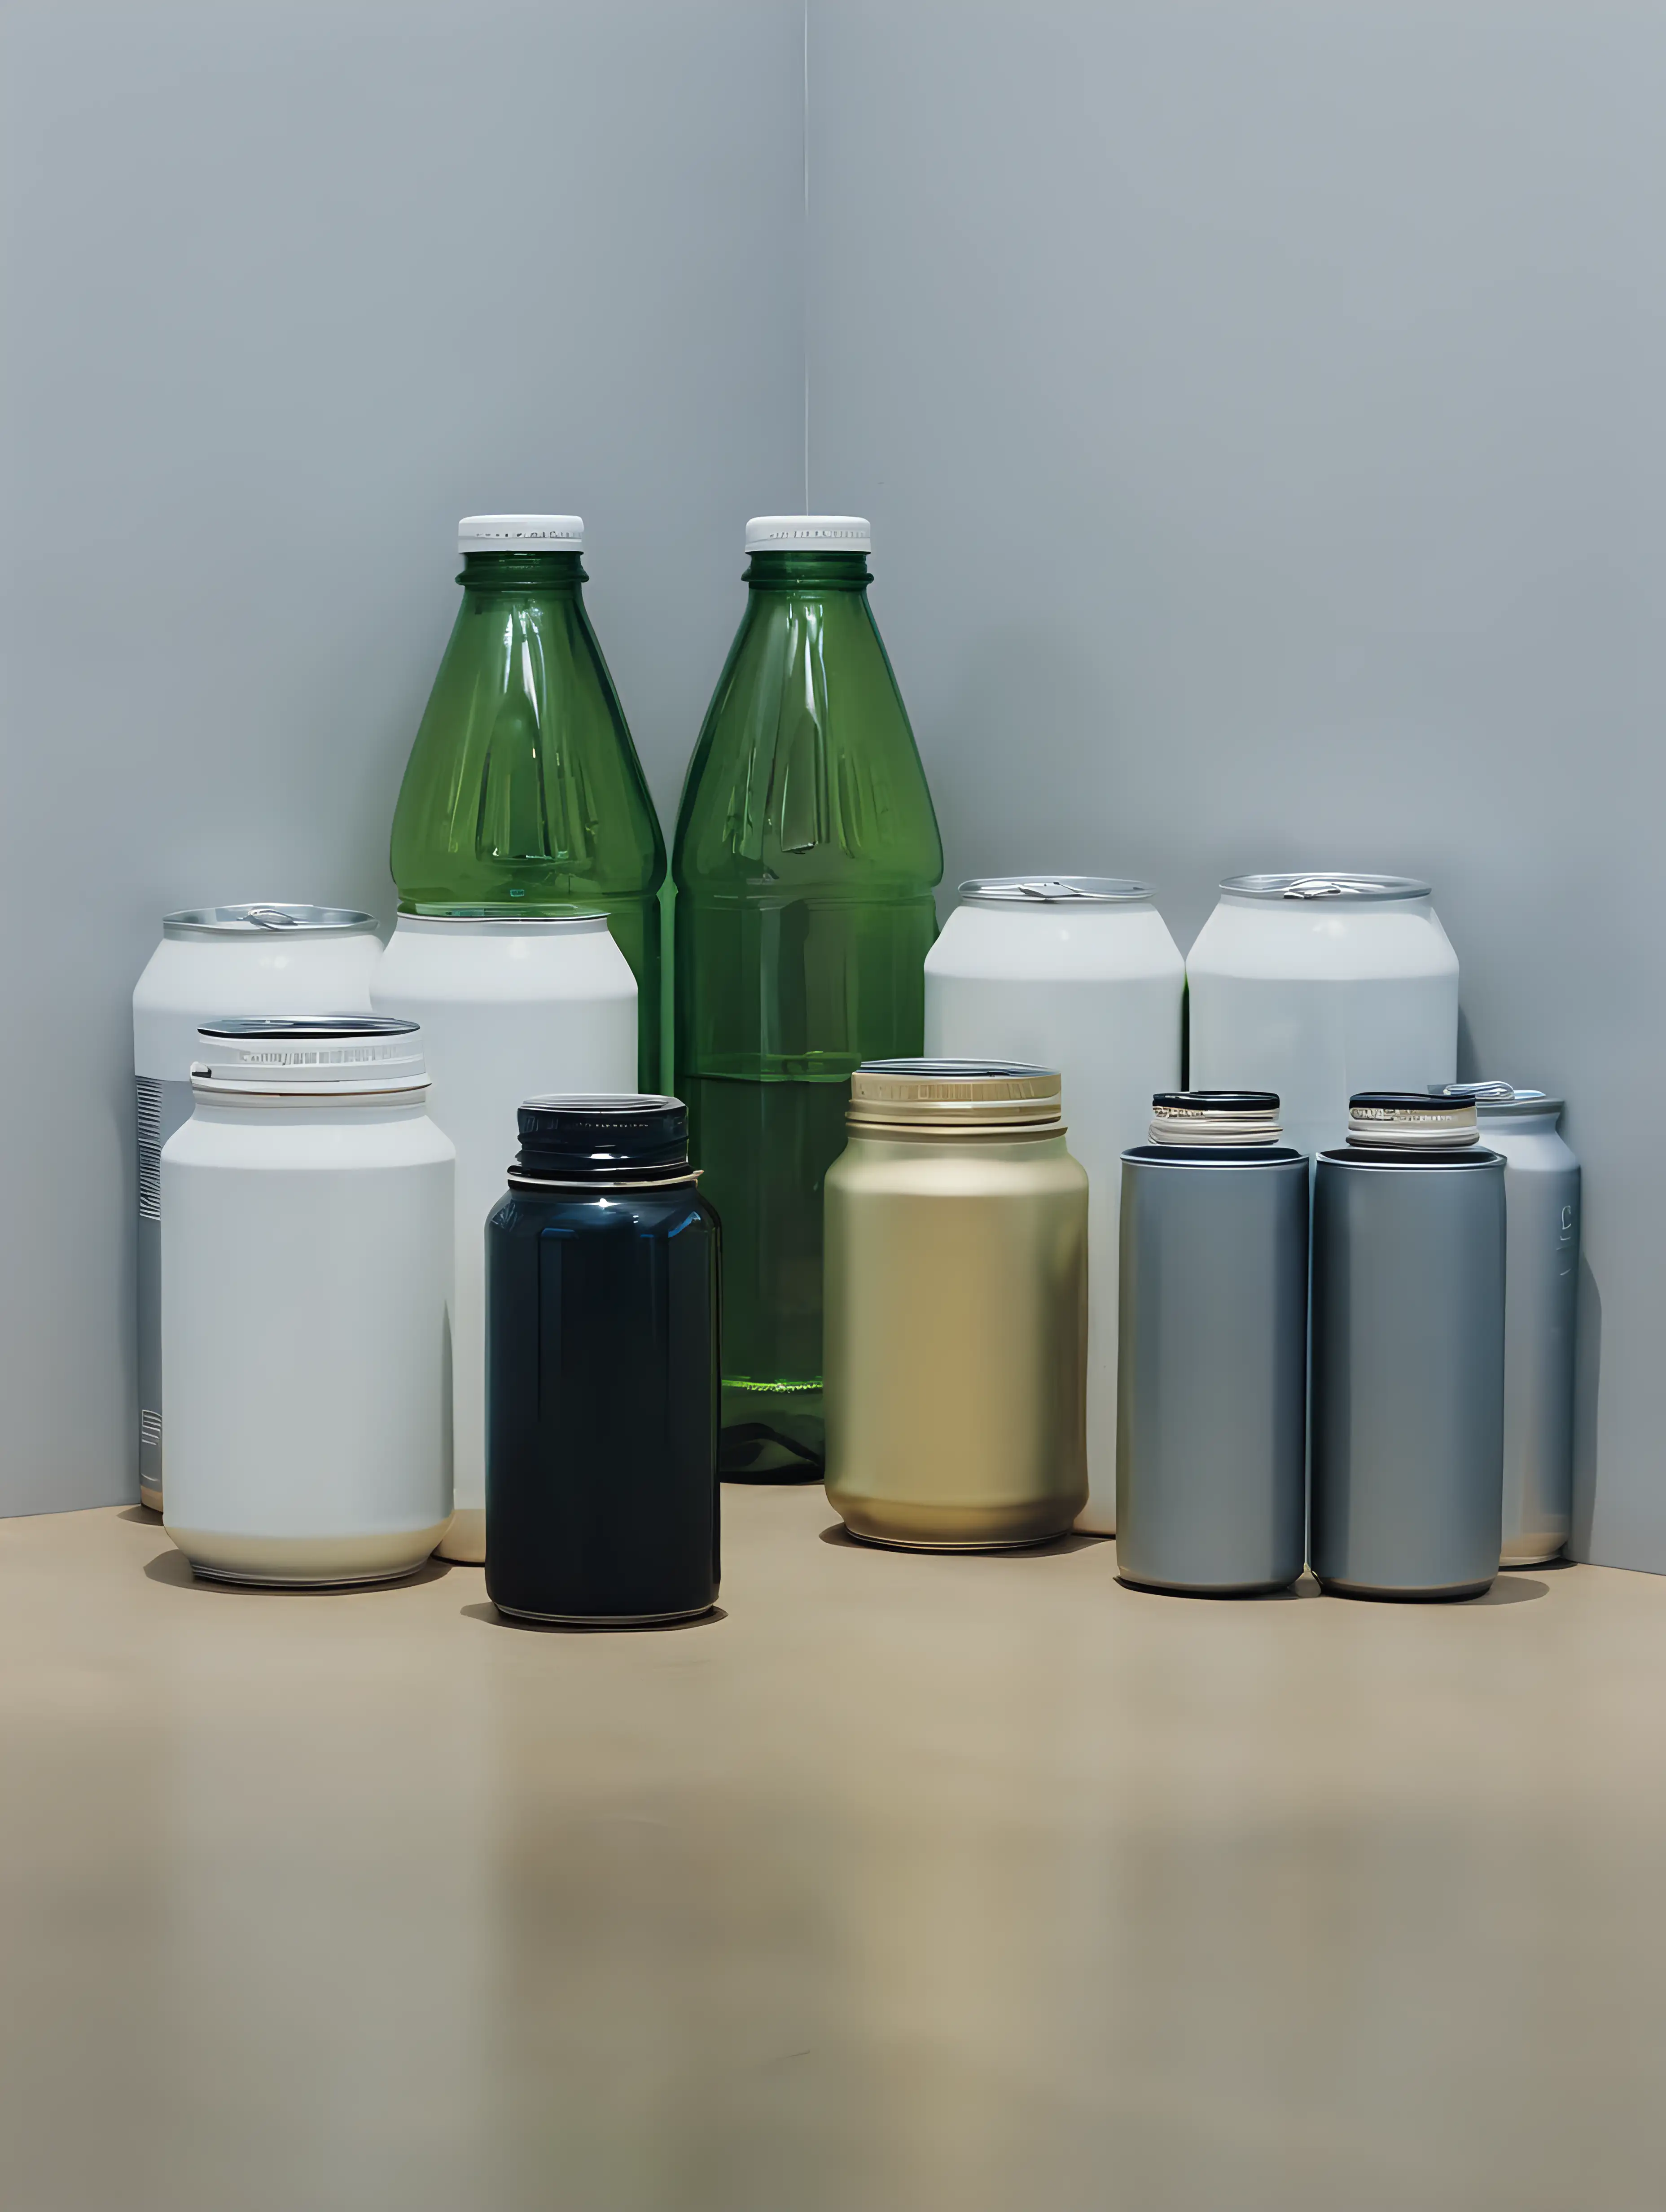 Minimalist Still Life Photography Bottles and Cans in 35mm